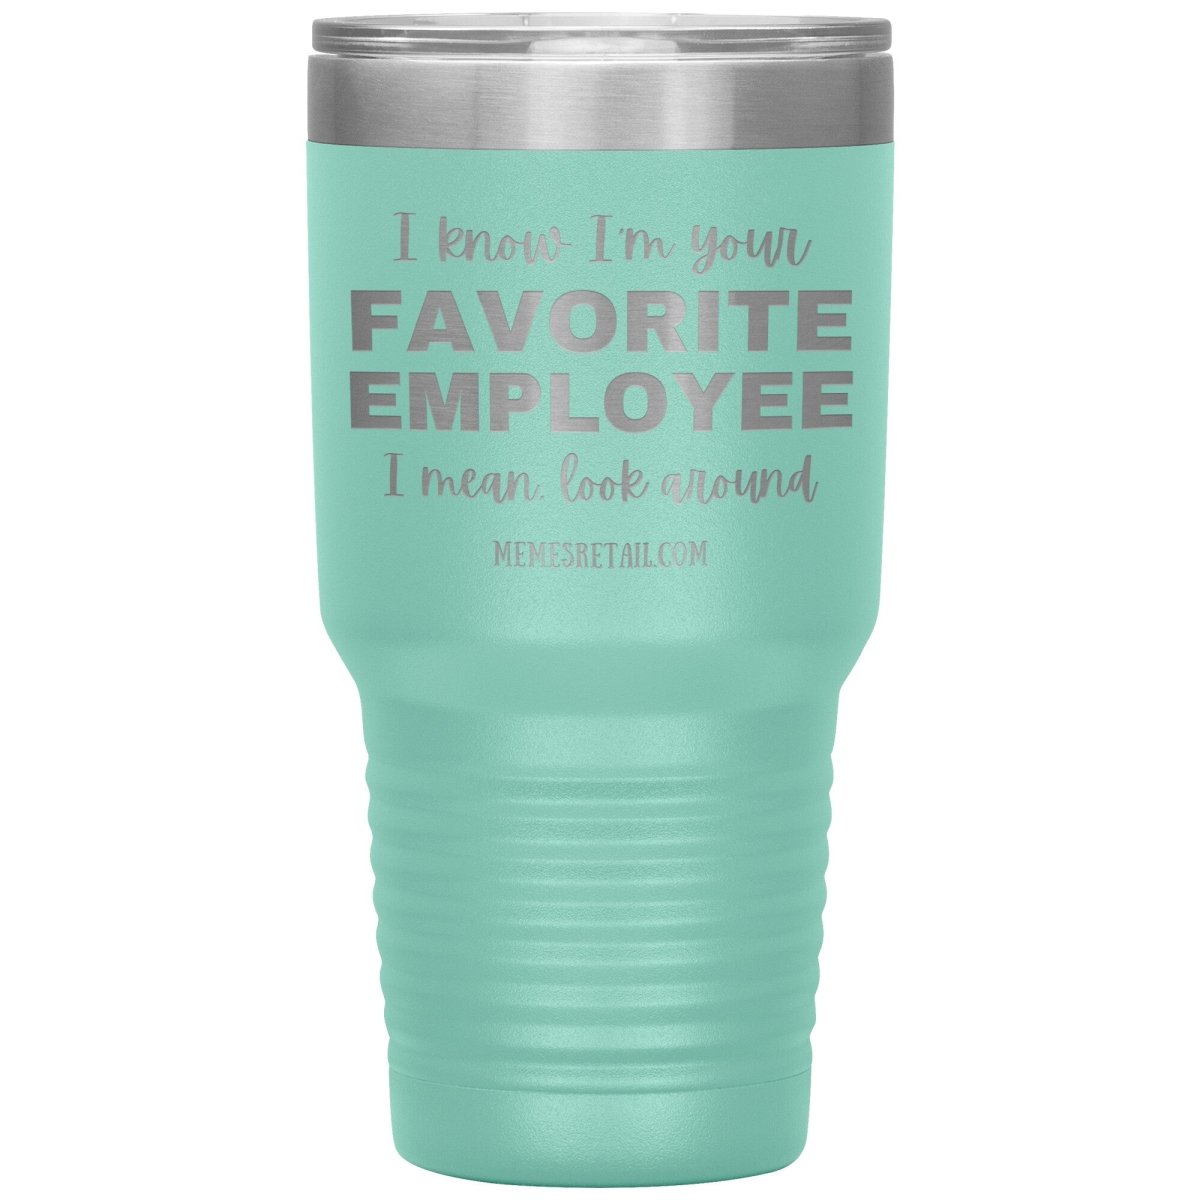 I know I’m your favorite employee, I mean look around, 30oz Insulated Tumbler / Teal - MemesRetail.com